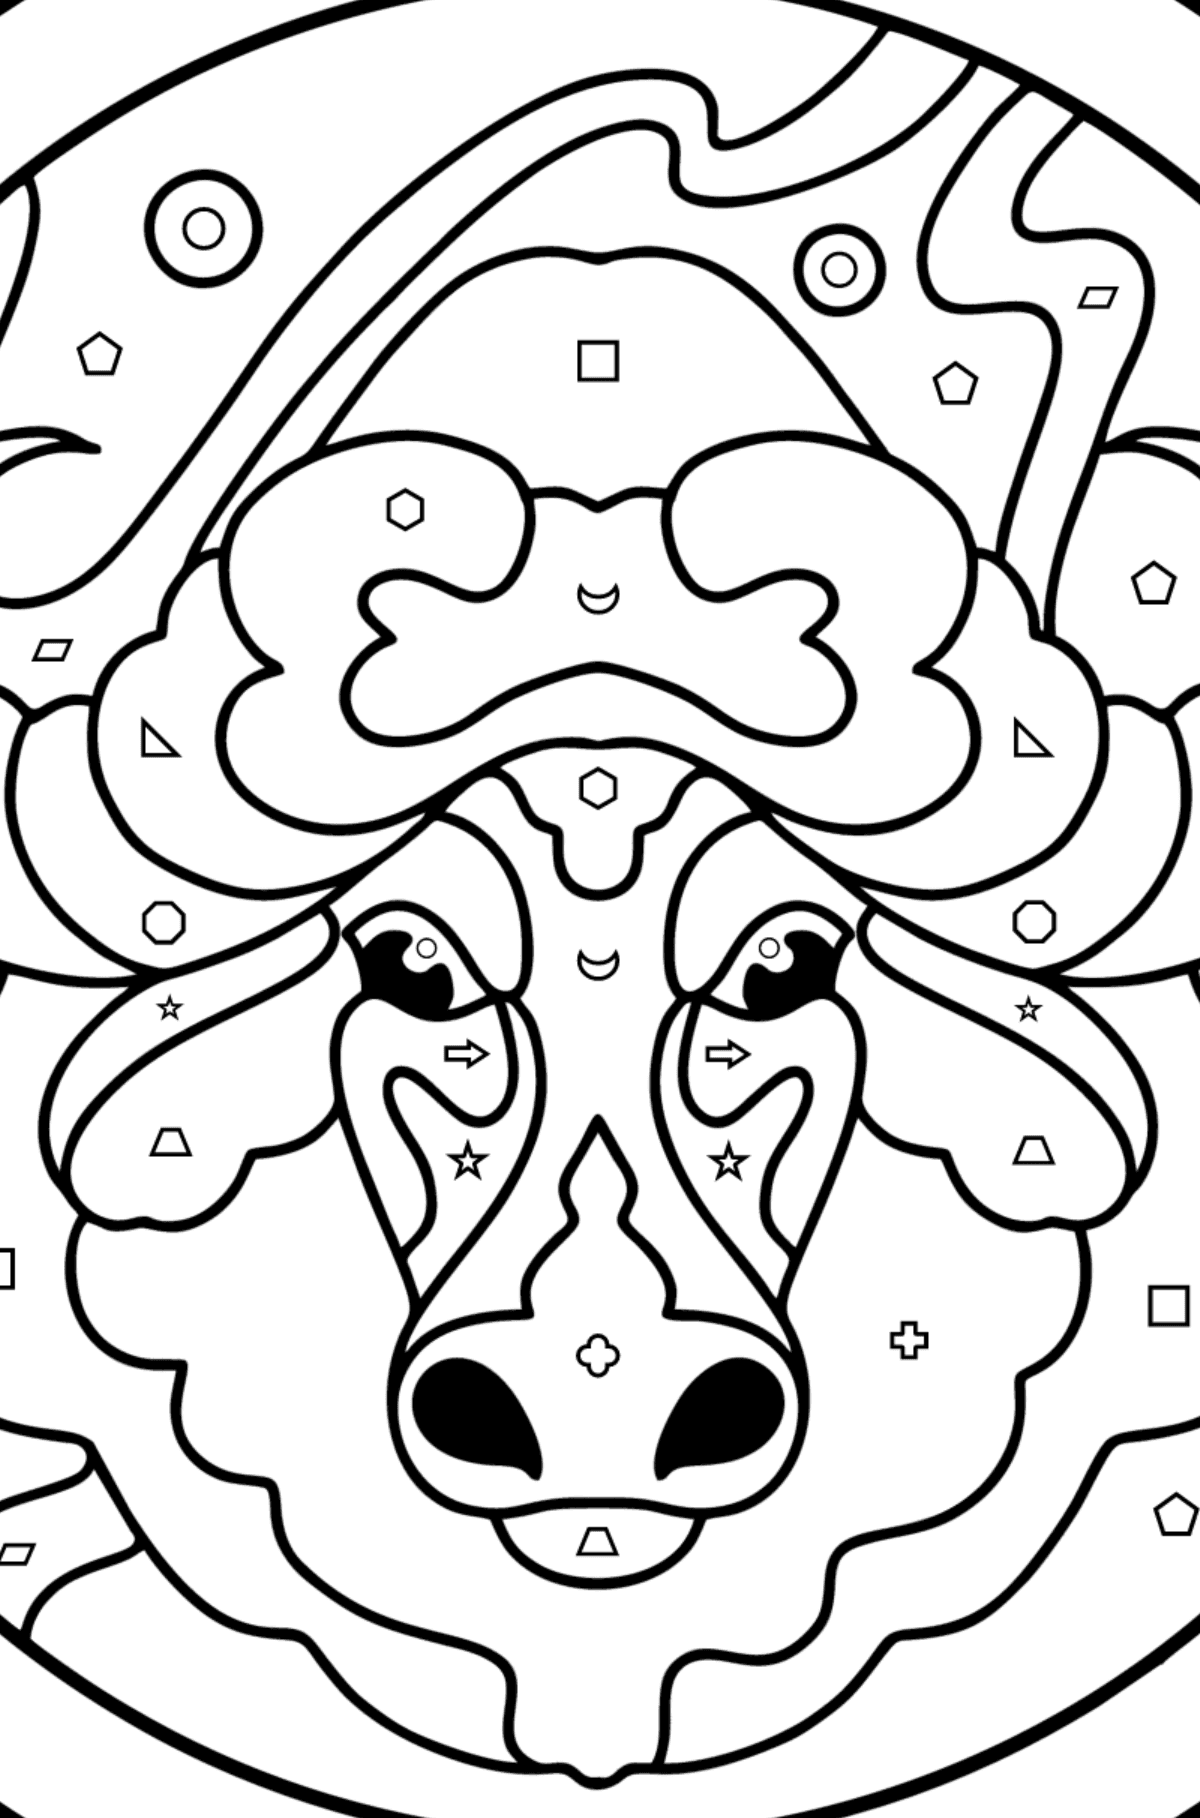 Coloring page for kids - zodiac sign Taurus - Coloring by Geometric Shapes for Kids